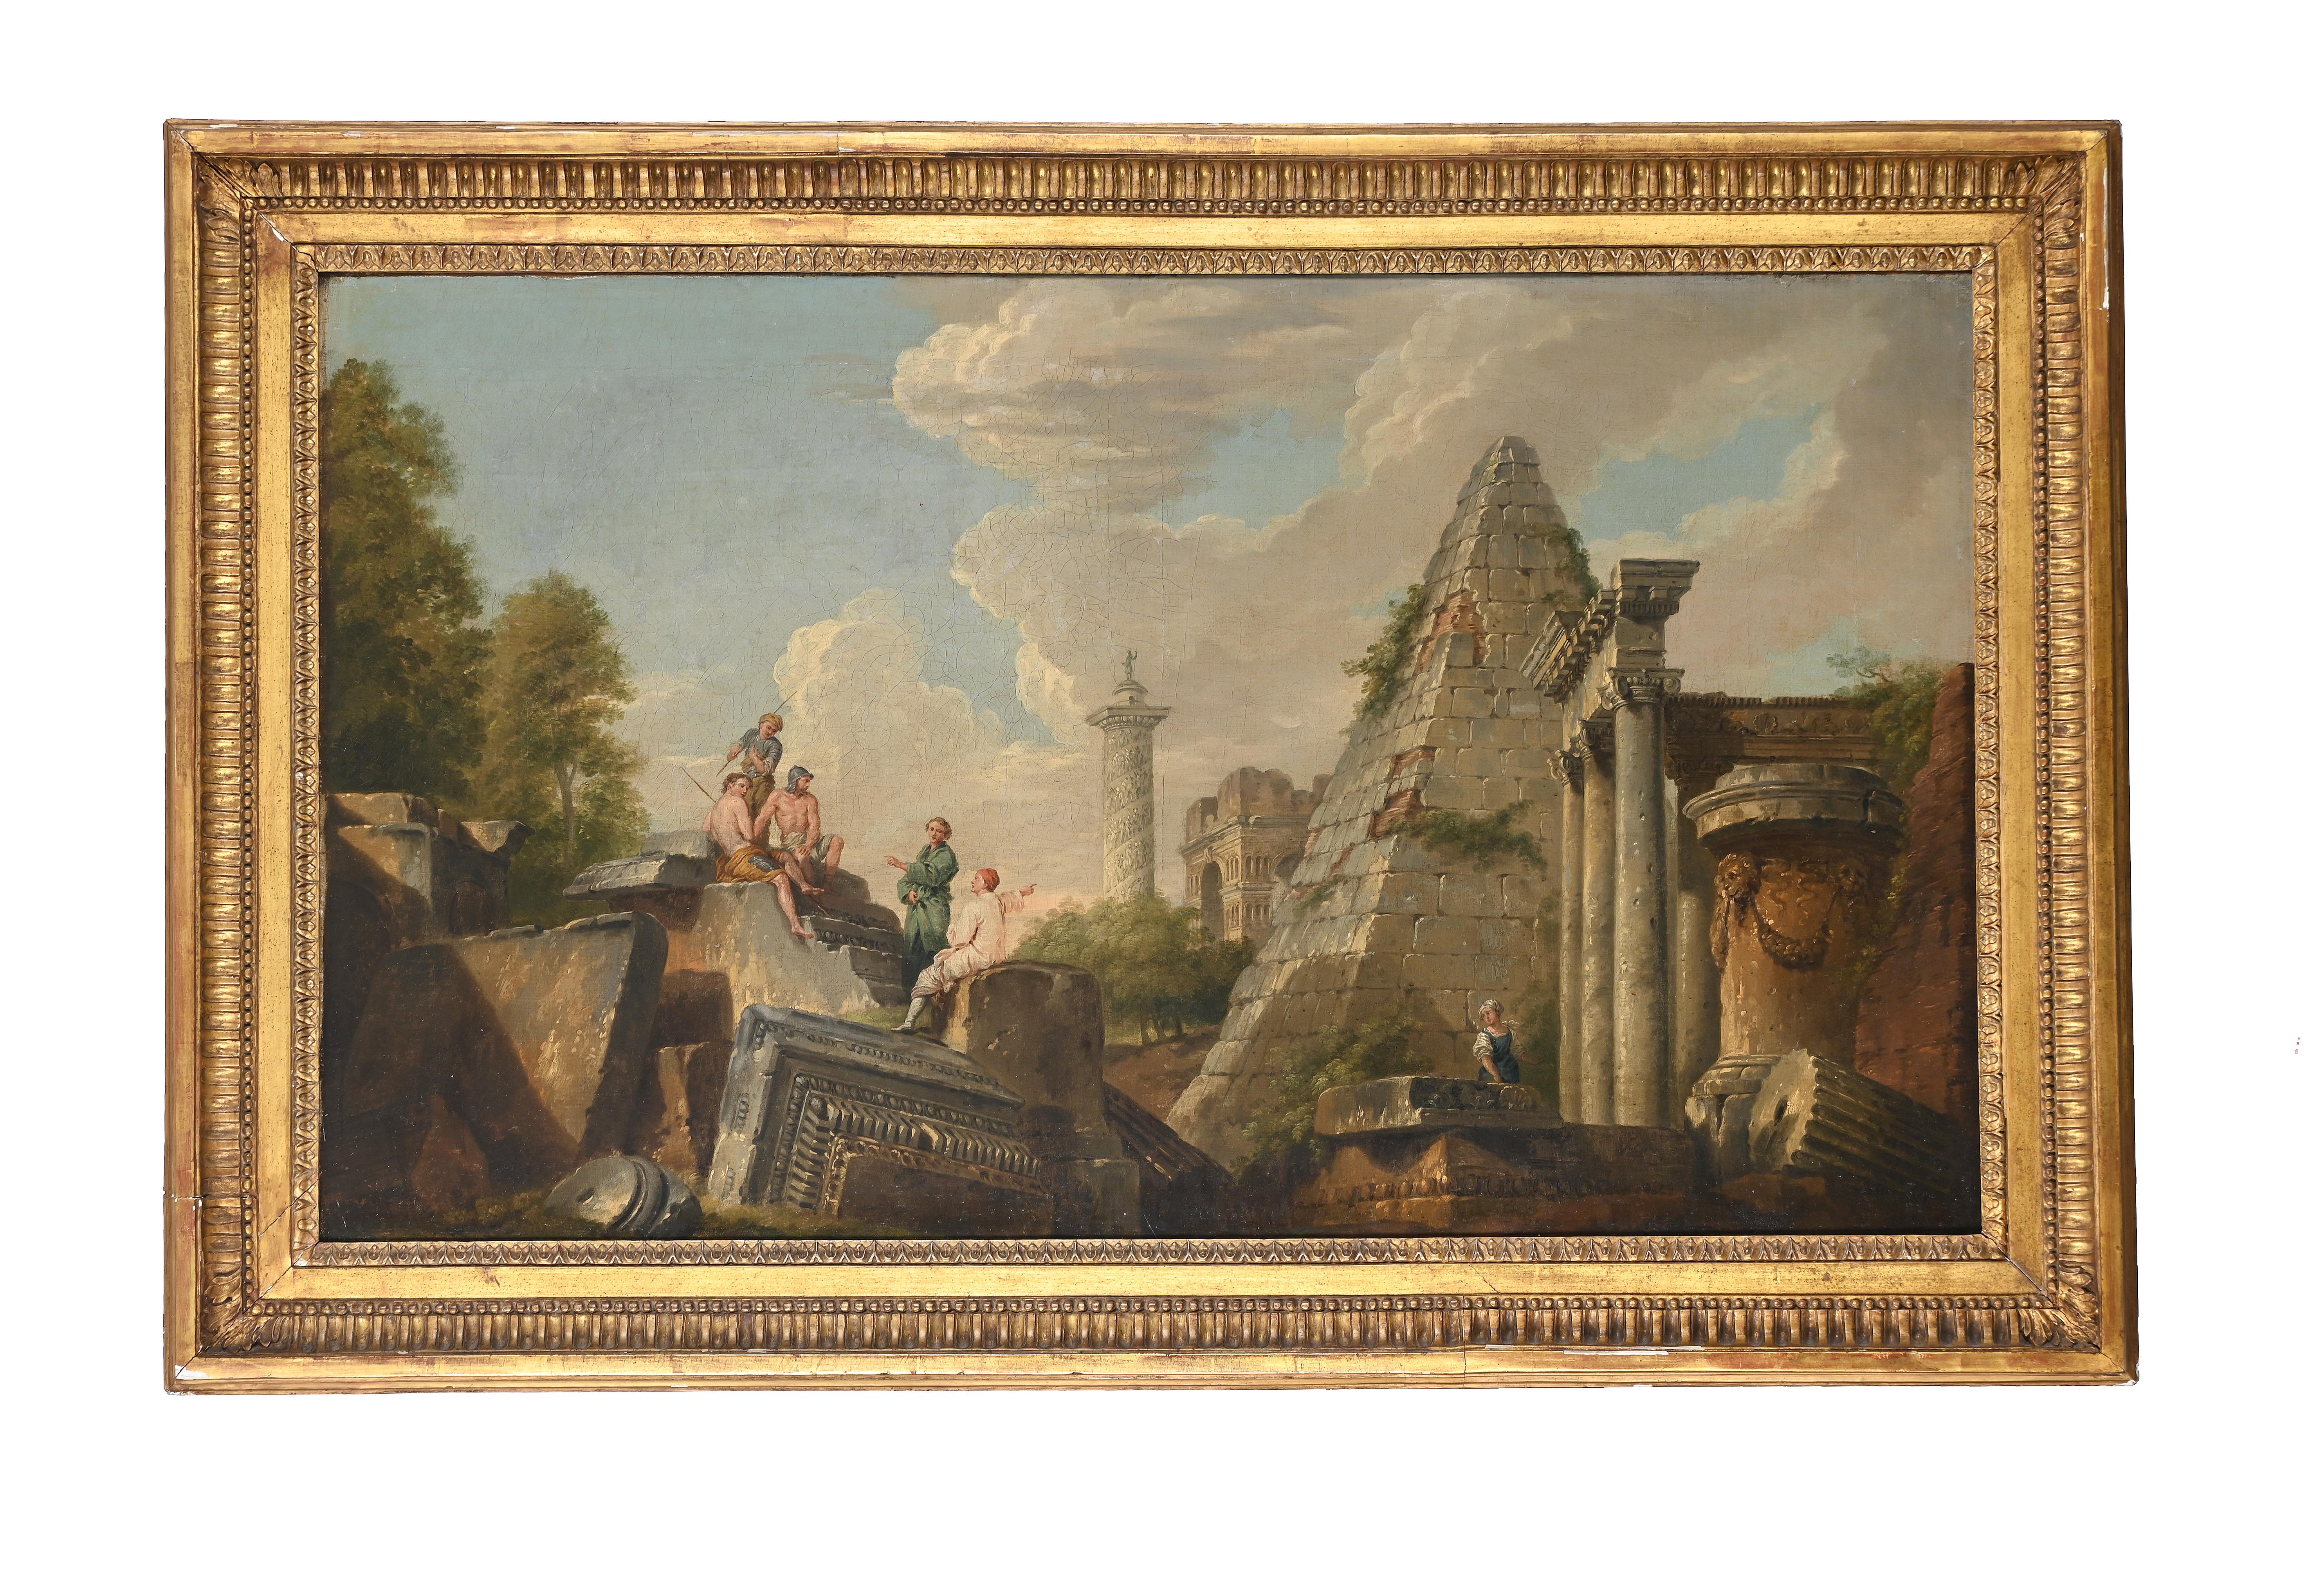 A pair of 18th century Italian landscapes with classical ruins and figures, circa 1750.
Circle of Giovanni Panini (1691-1765)
Thomas Agnew and Sons, London, labels on the reverse

Each oil on canvas, 60 x 103cm (23 x 40in), in period giltwood